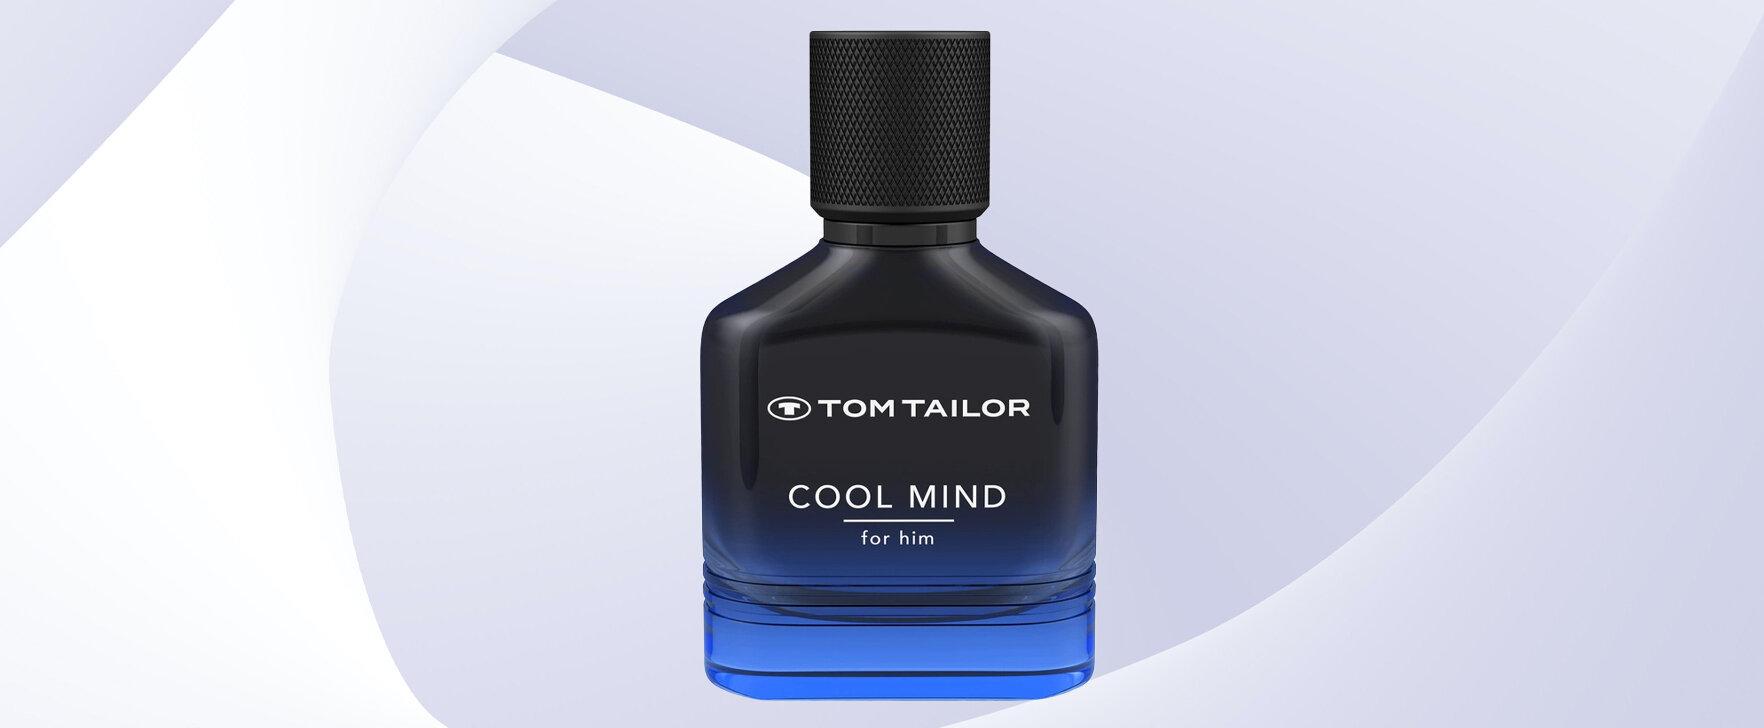 "Cool Mind": The New Masculine Eau de Toilette From Tom Tailor